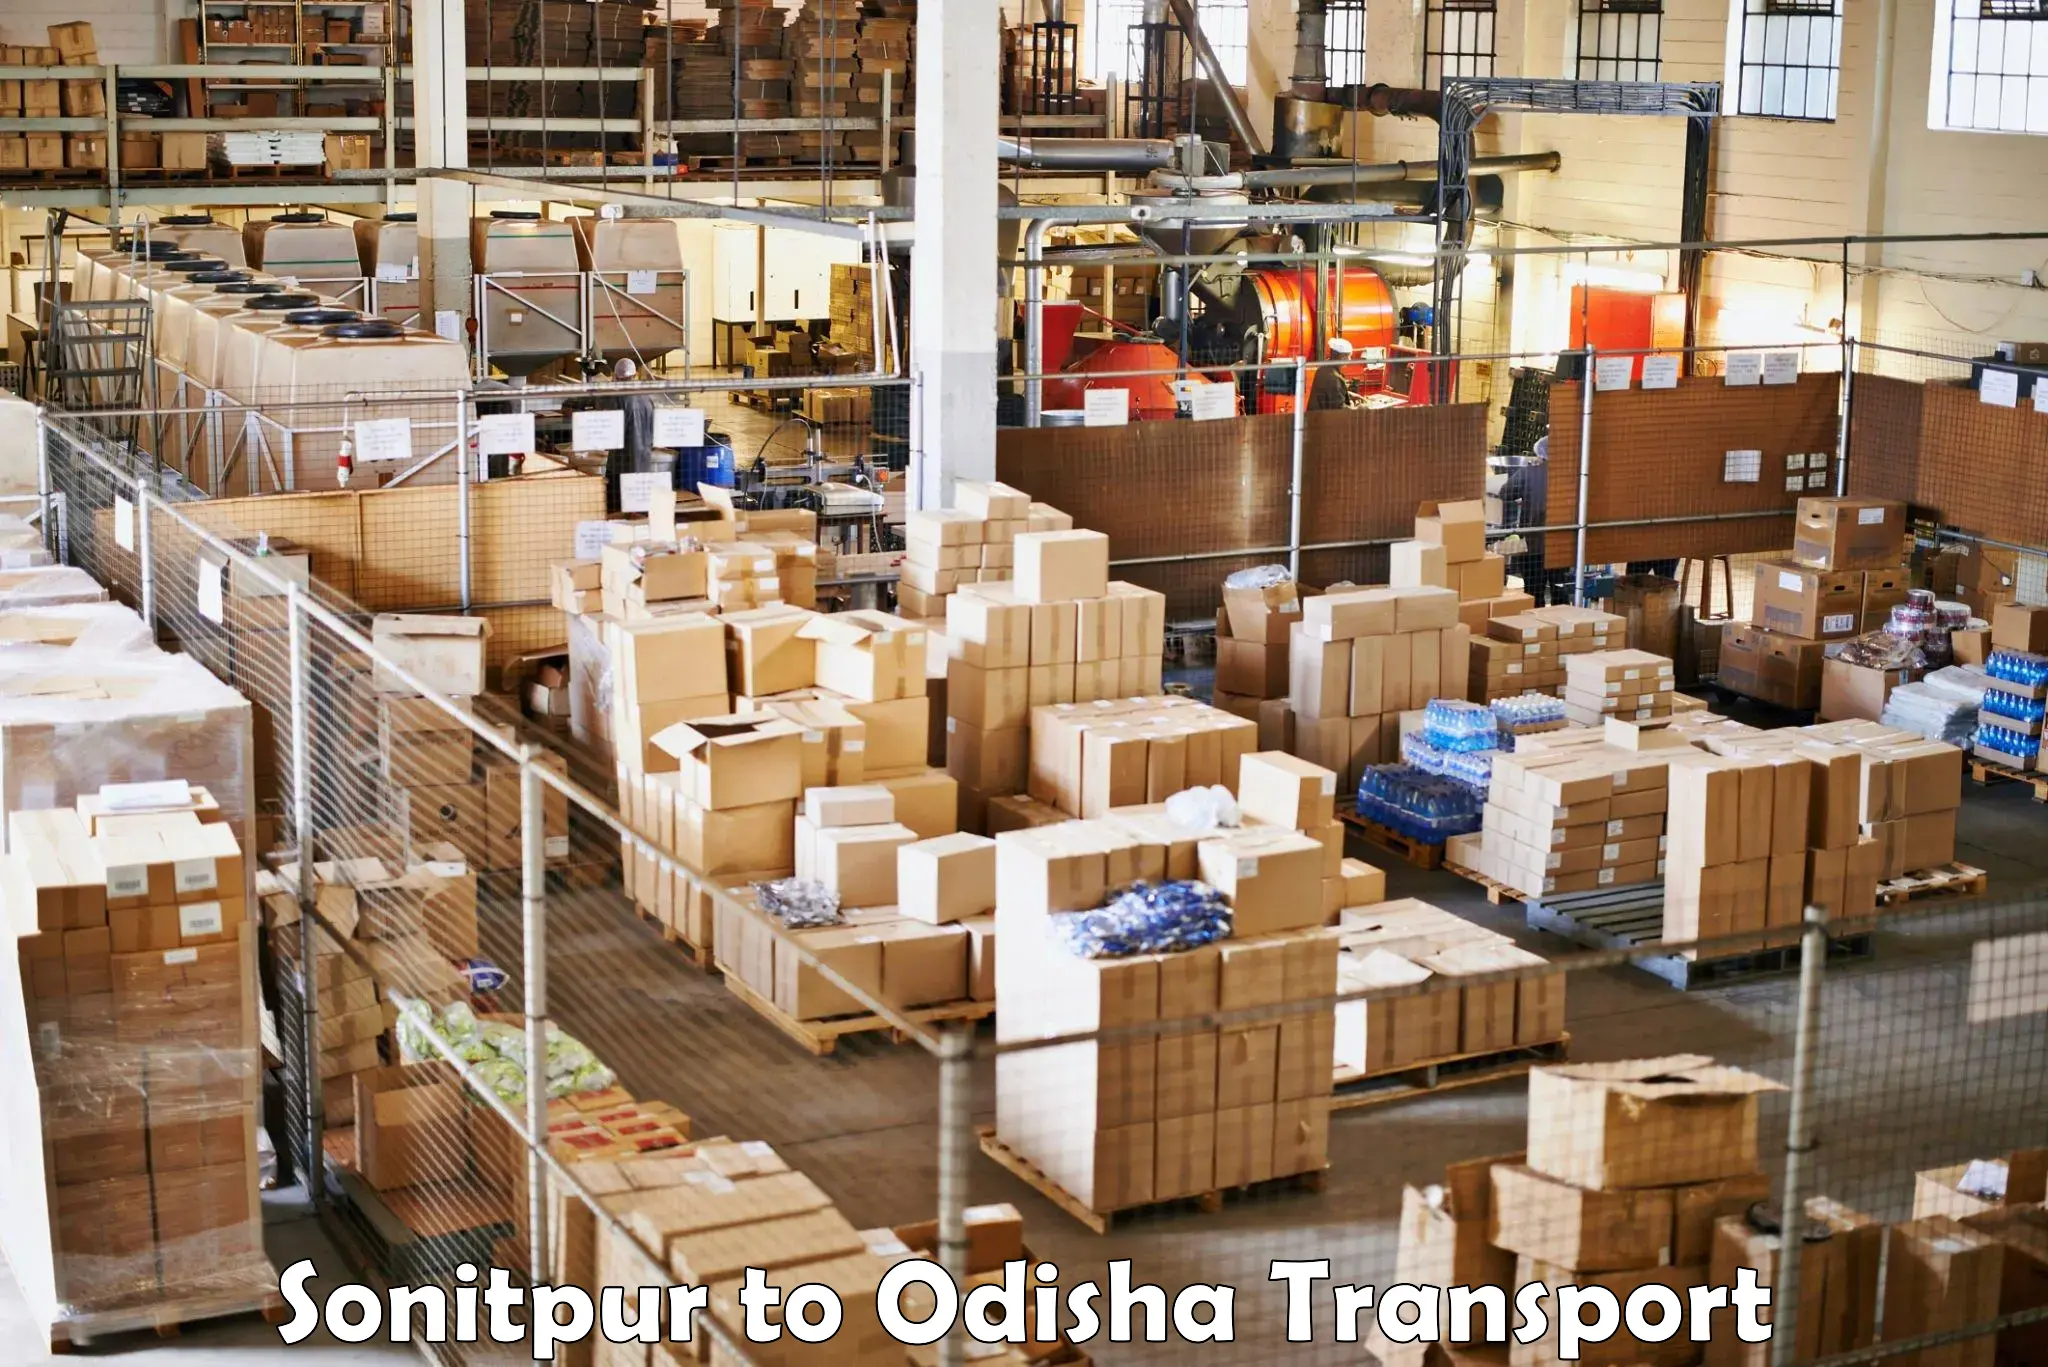 Commercial transport service Sonitpur to Odisha